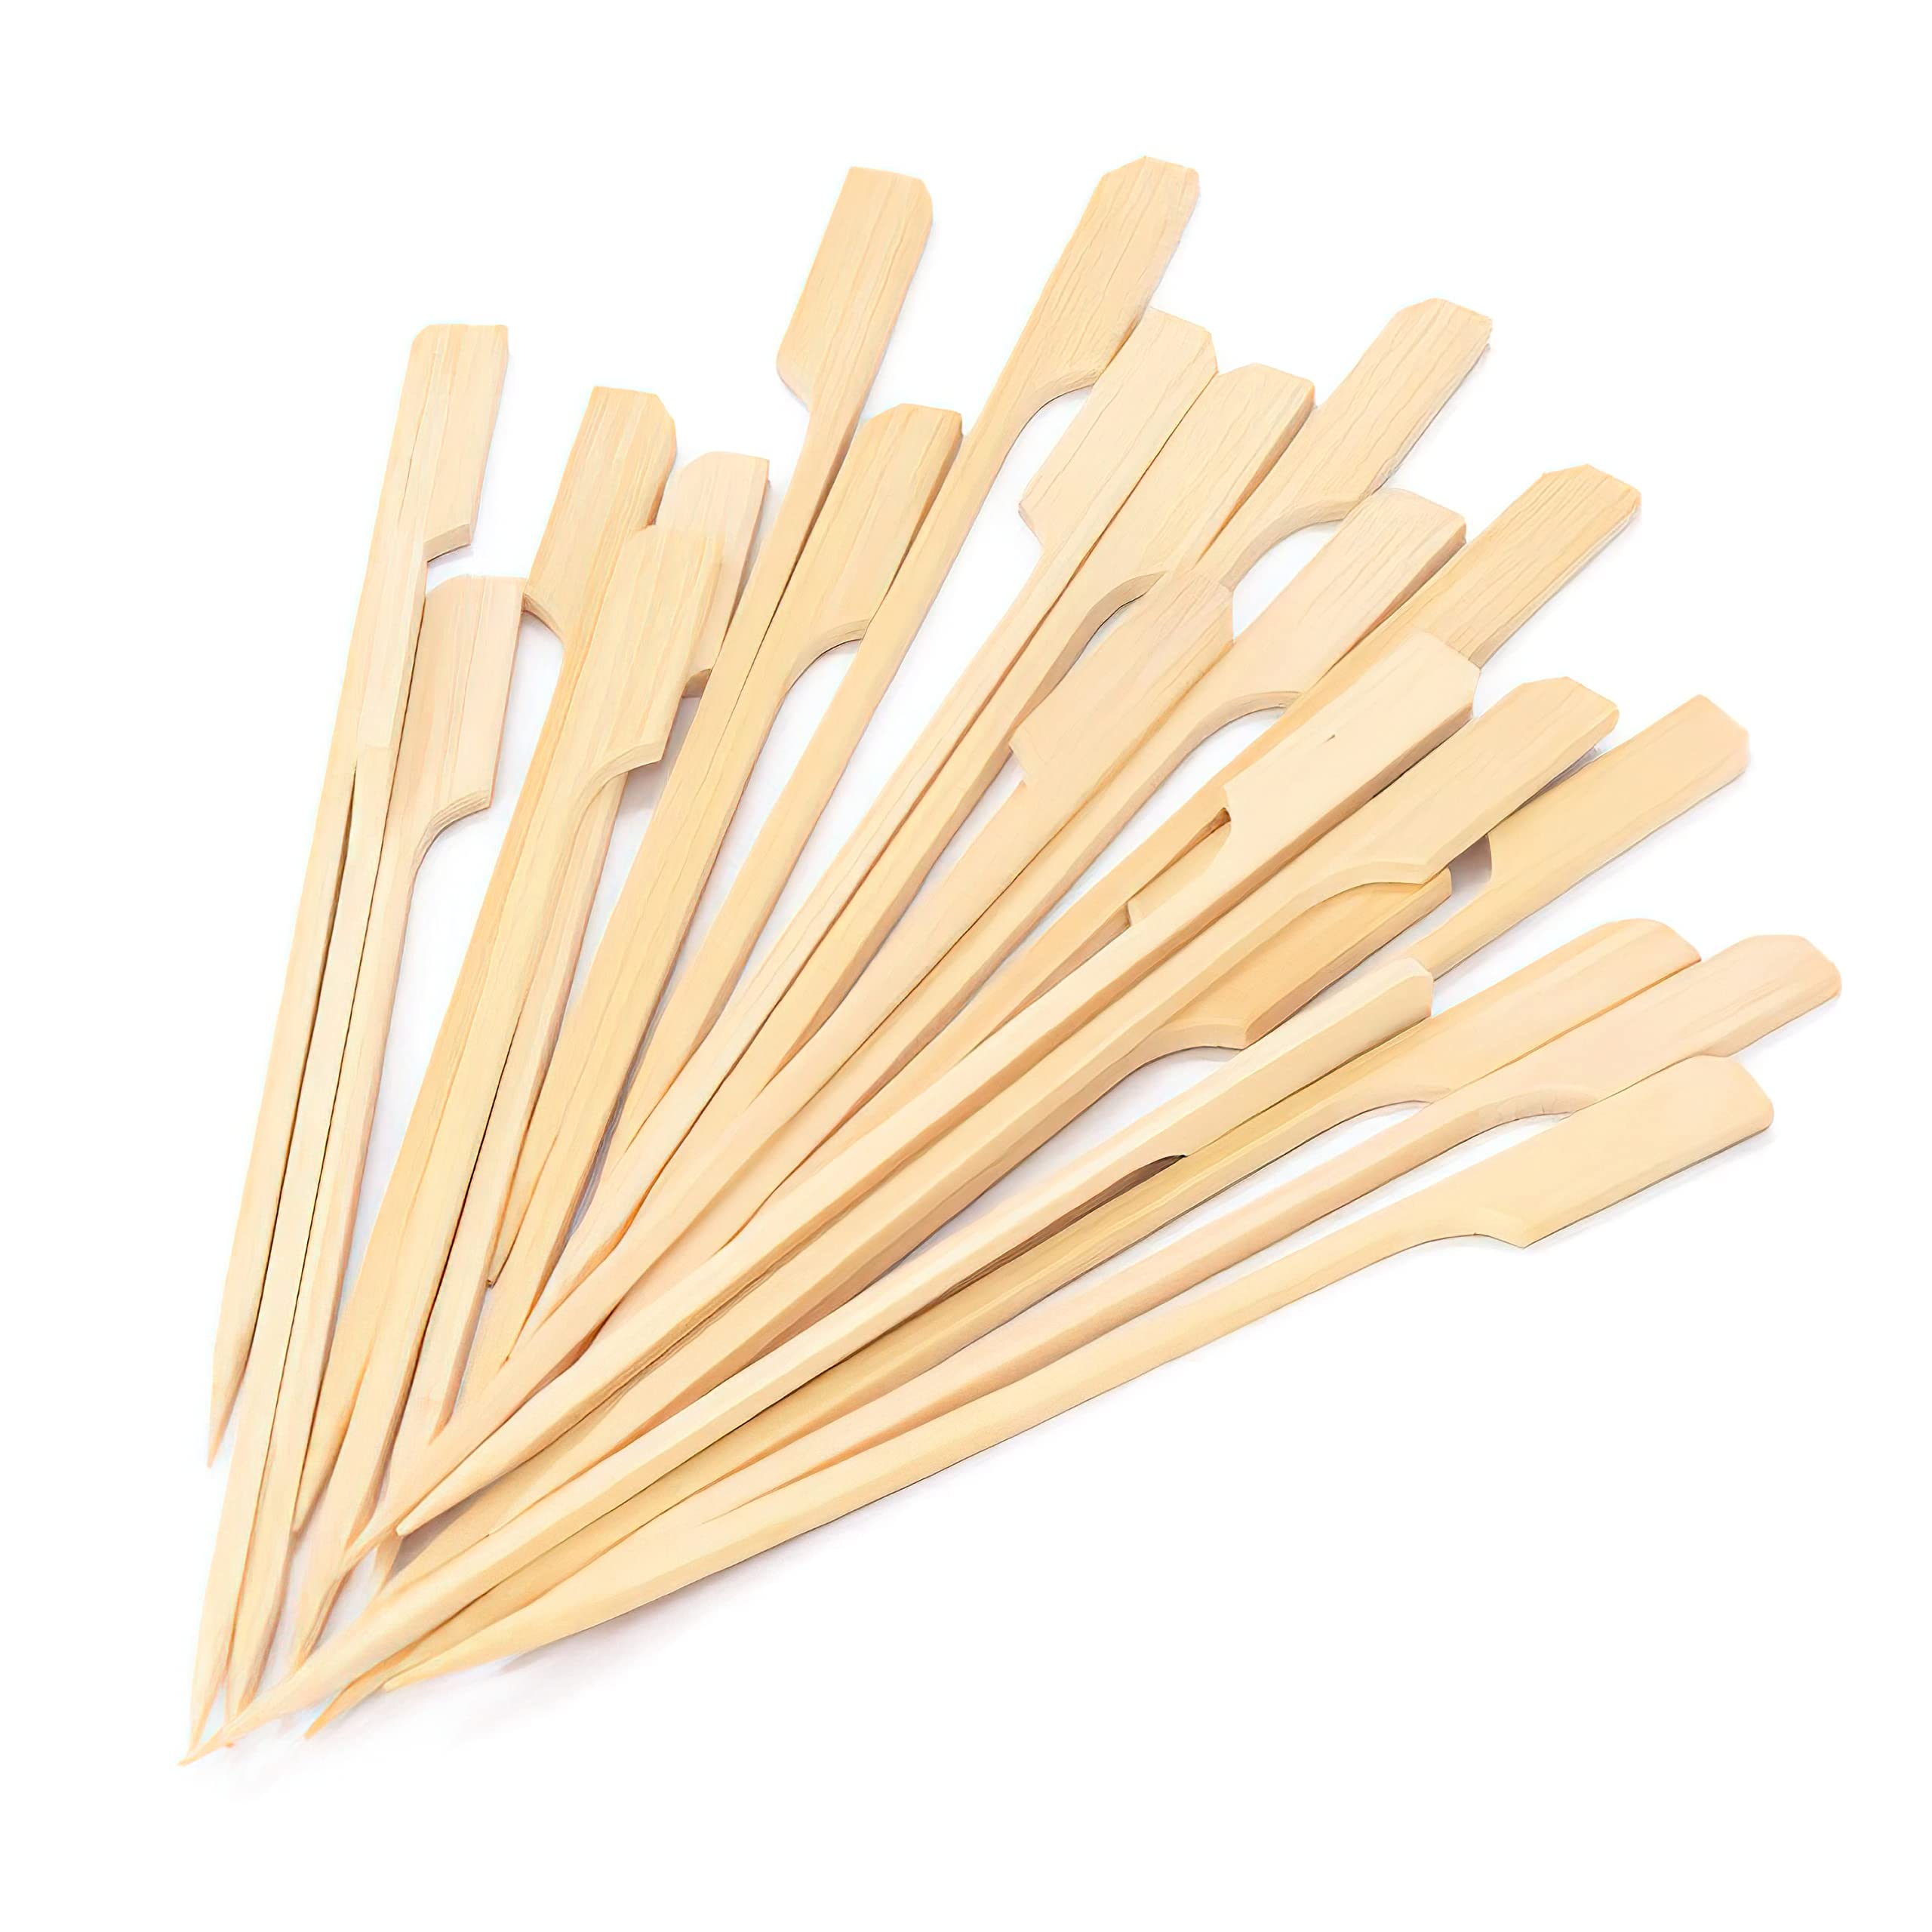 MOLFUJ 6 Inch Bamboo Skewers 100PCS Food Appetizer Toothpicks Wide Flat Paddle Bamboo Wood Picks for Cocktail, Marshmallow, Fruit, Gril